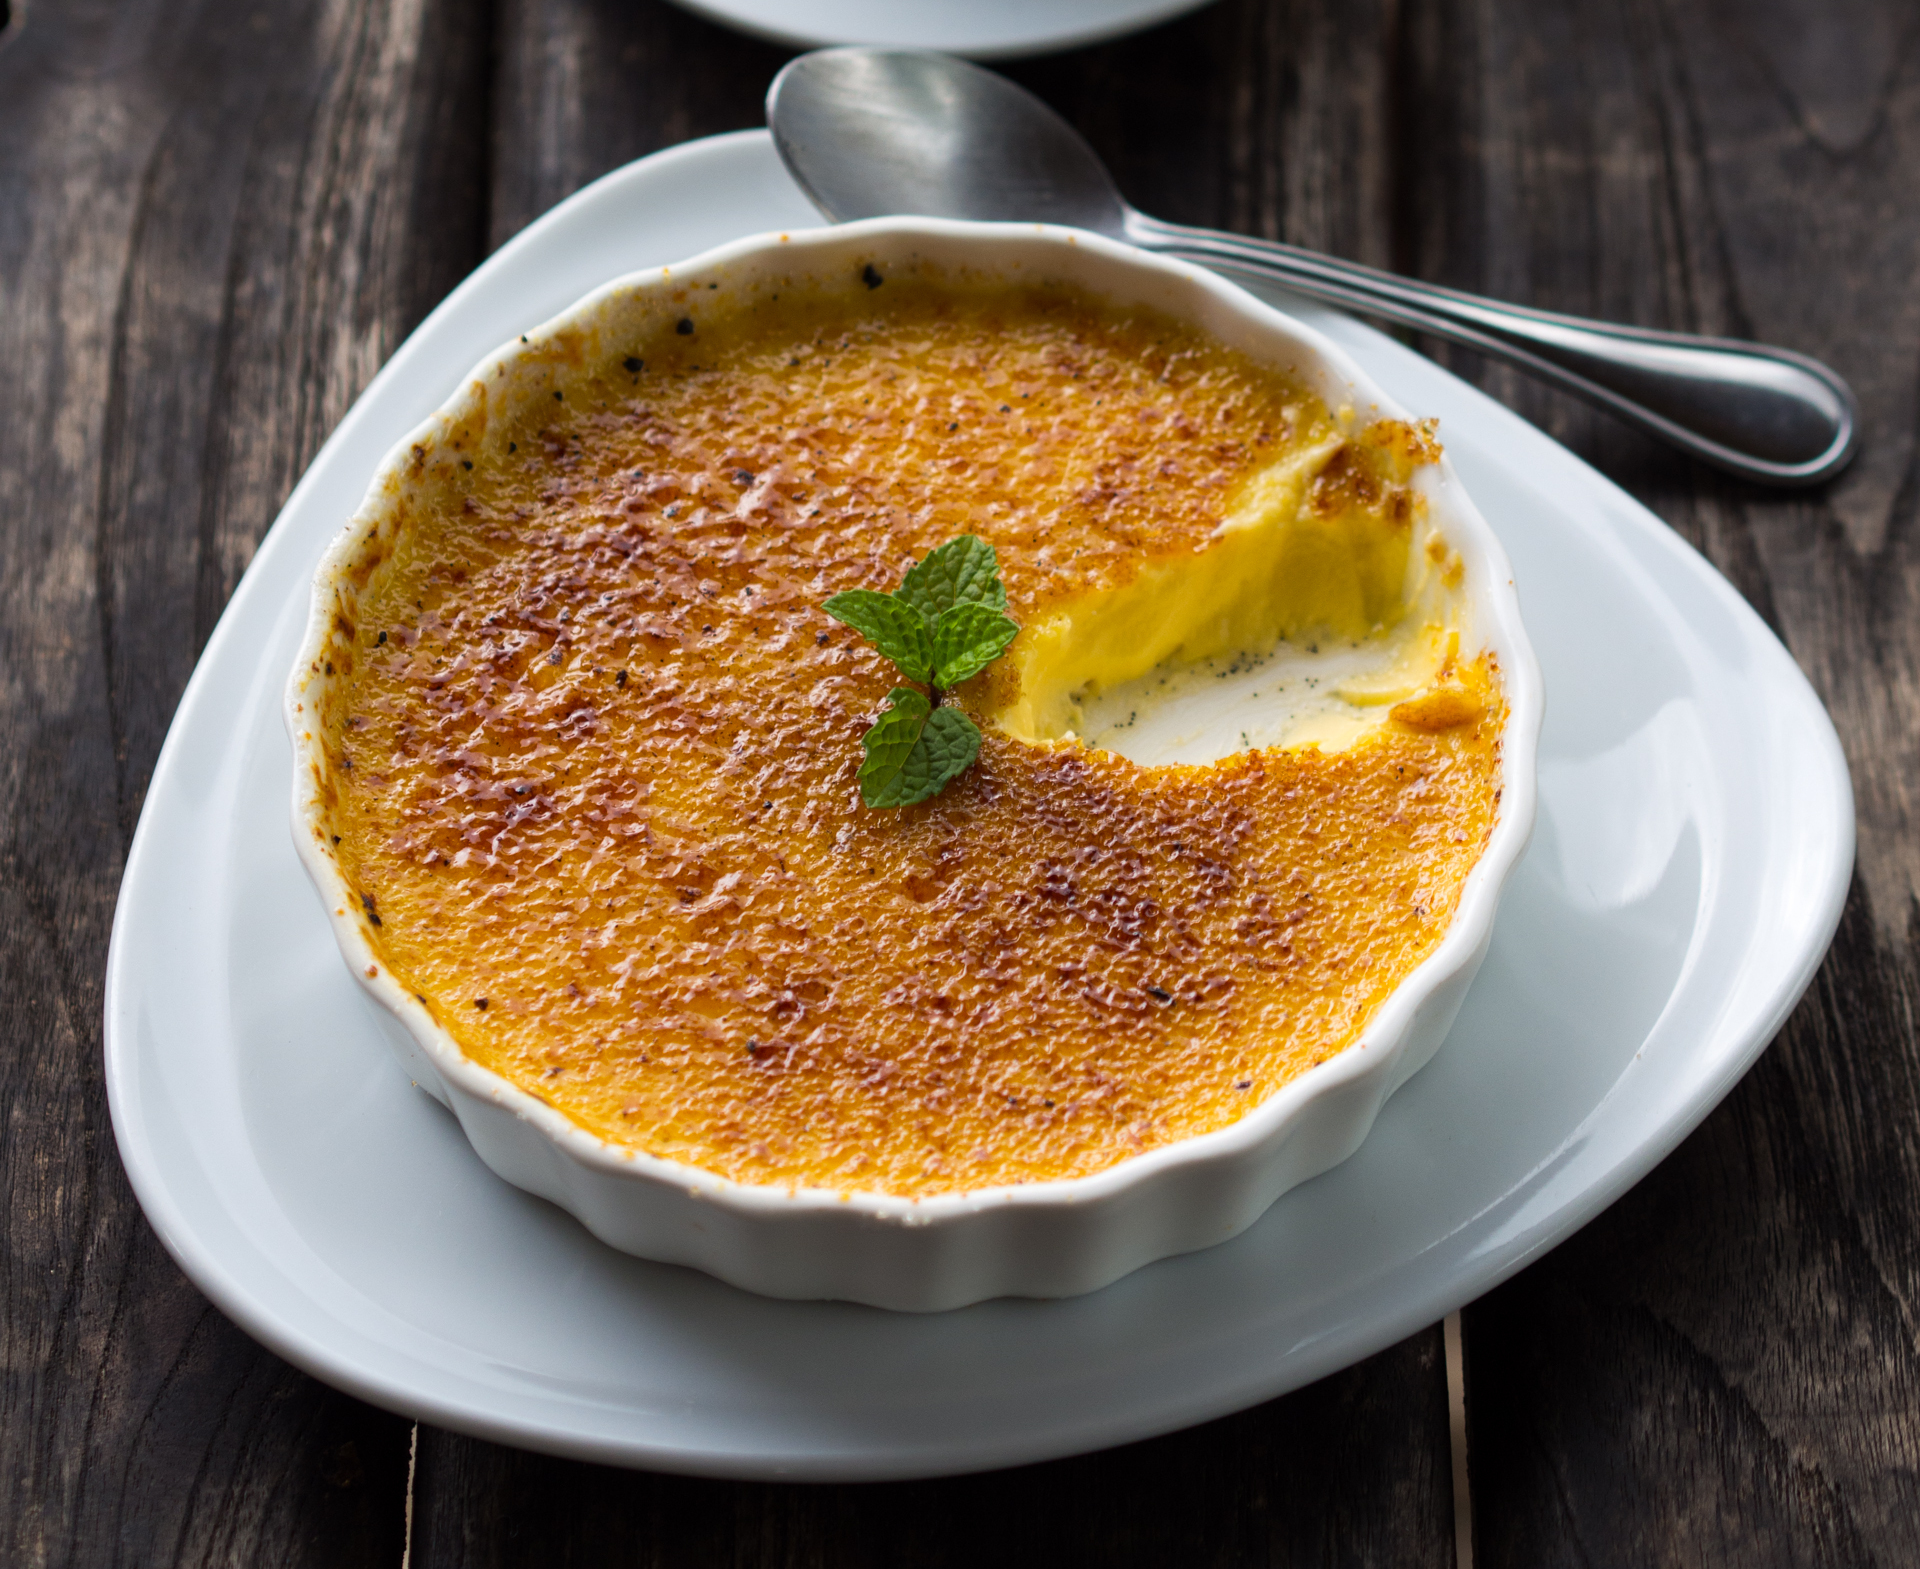 Creme brulee : a Wonderful traditional French dessert